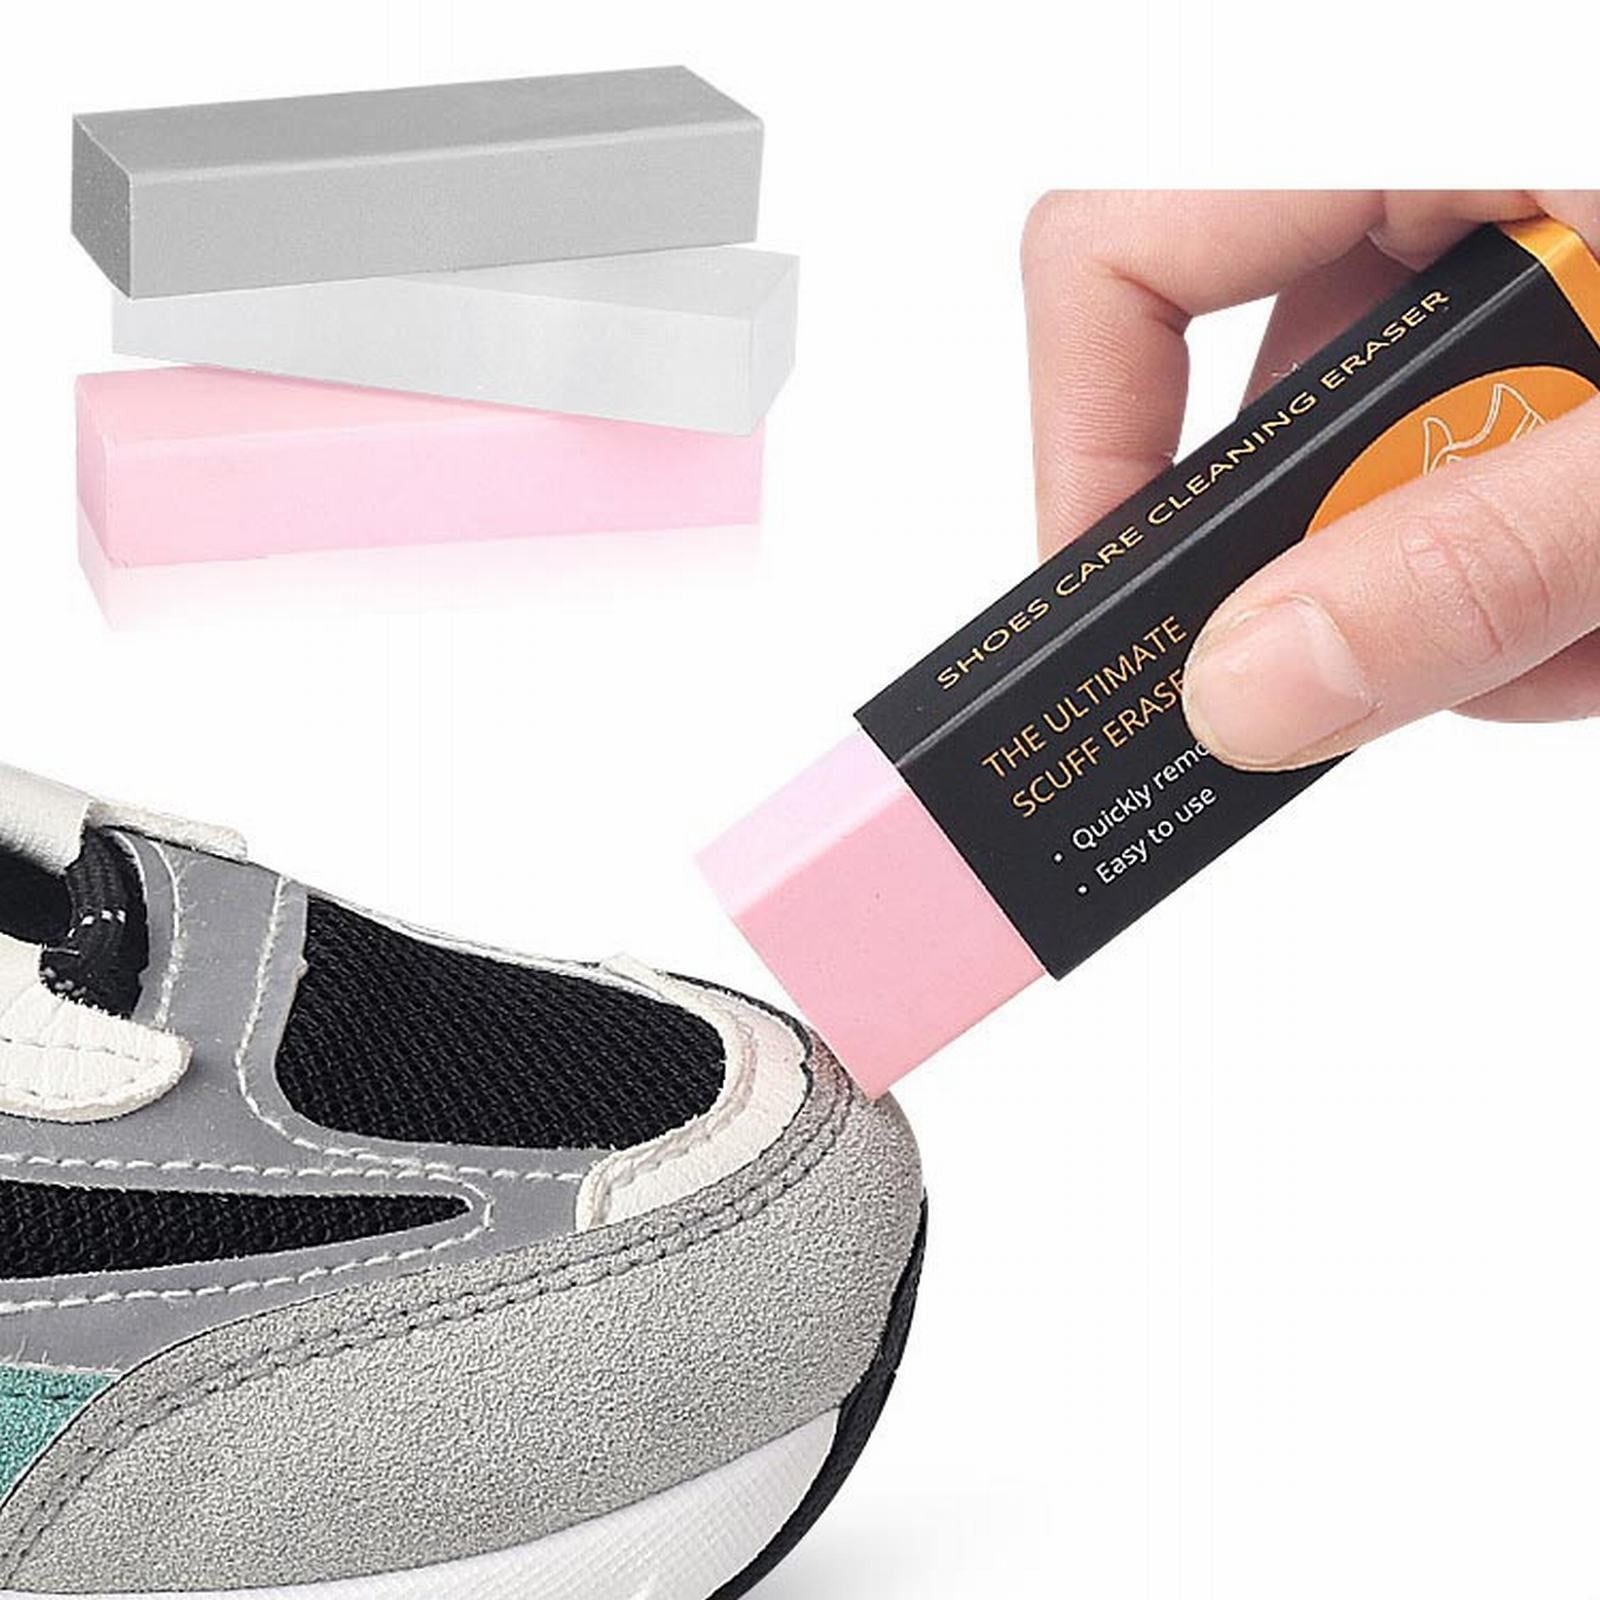 Hesroicy Helpful Shoes Clean Eraser No Water Required Fast Decontamination  Widely Used Practical Sneakers Eraser for Turn Fur 